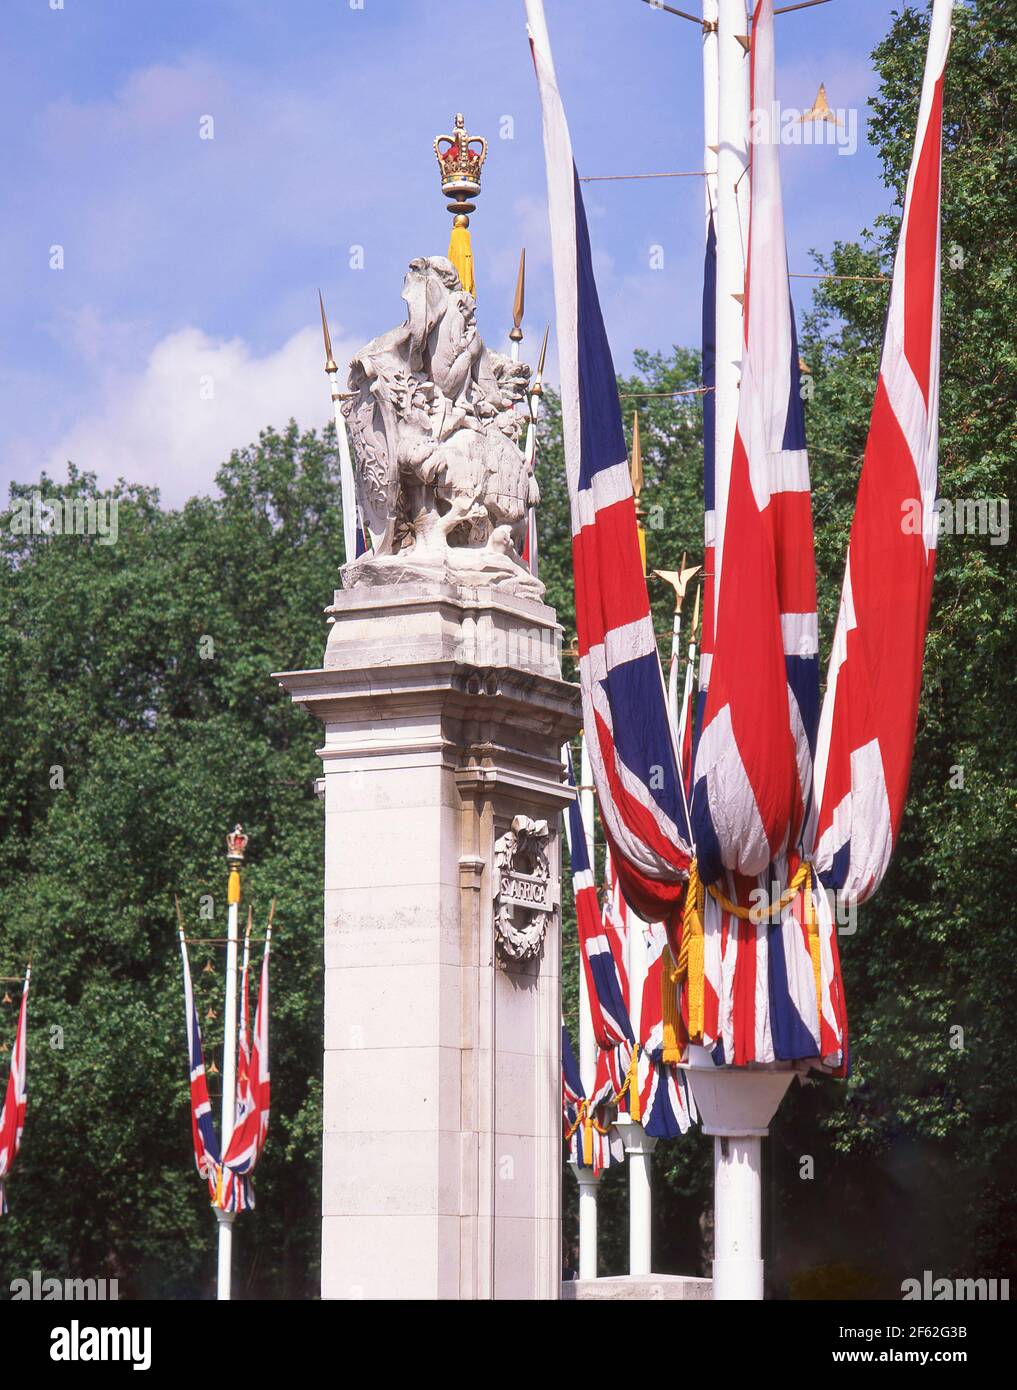 Decorative Royal flags on pole, Buckingham Palace, The Mall, City of Westminster, Greater London, England, United Kingdom Stock Photo